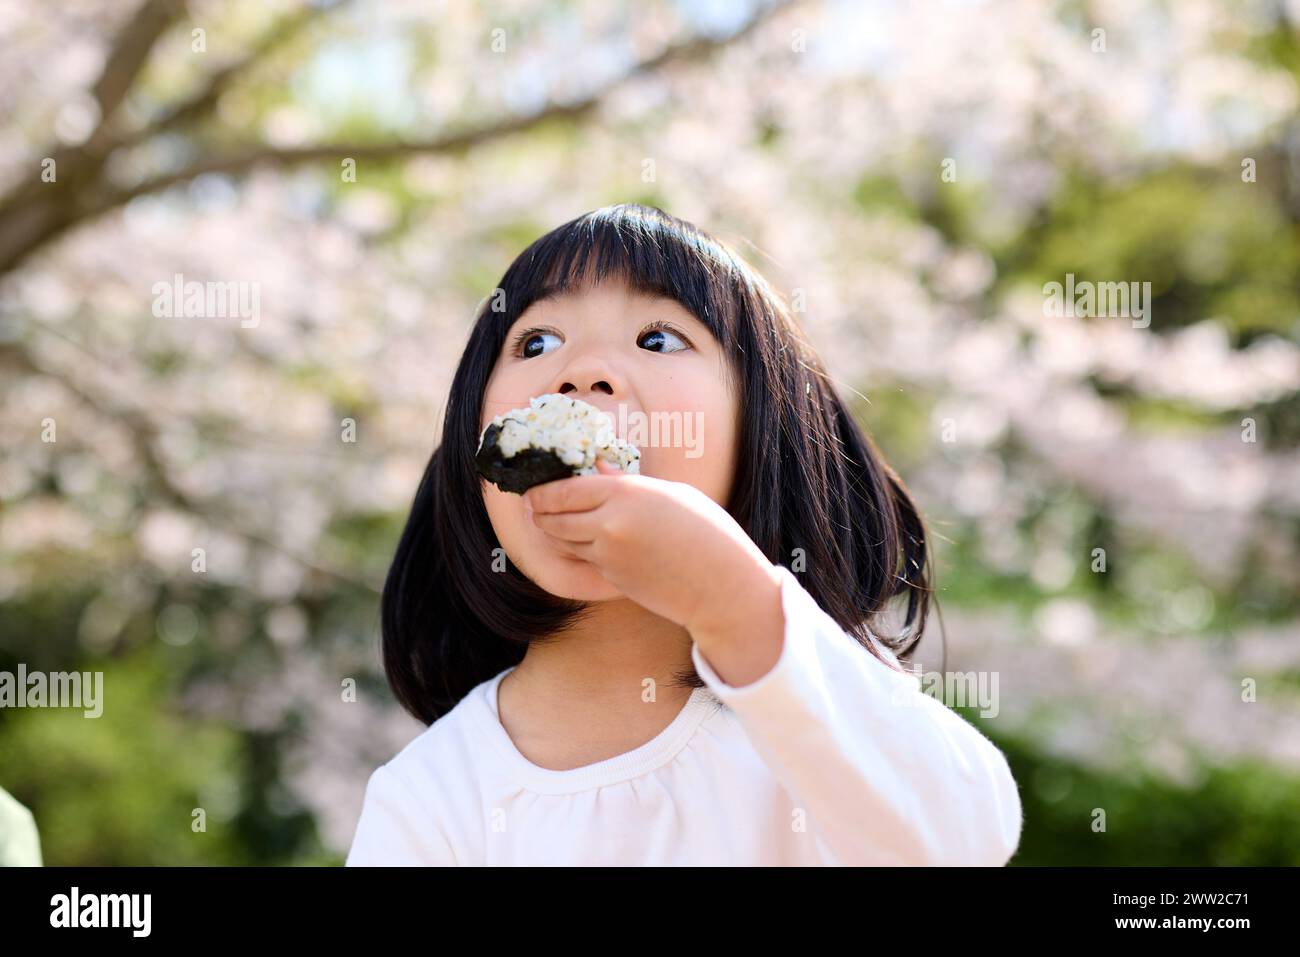 A little girl eating a rice ball Stock Photo